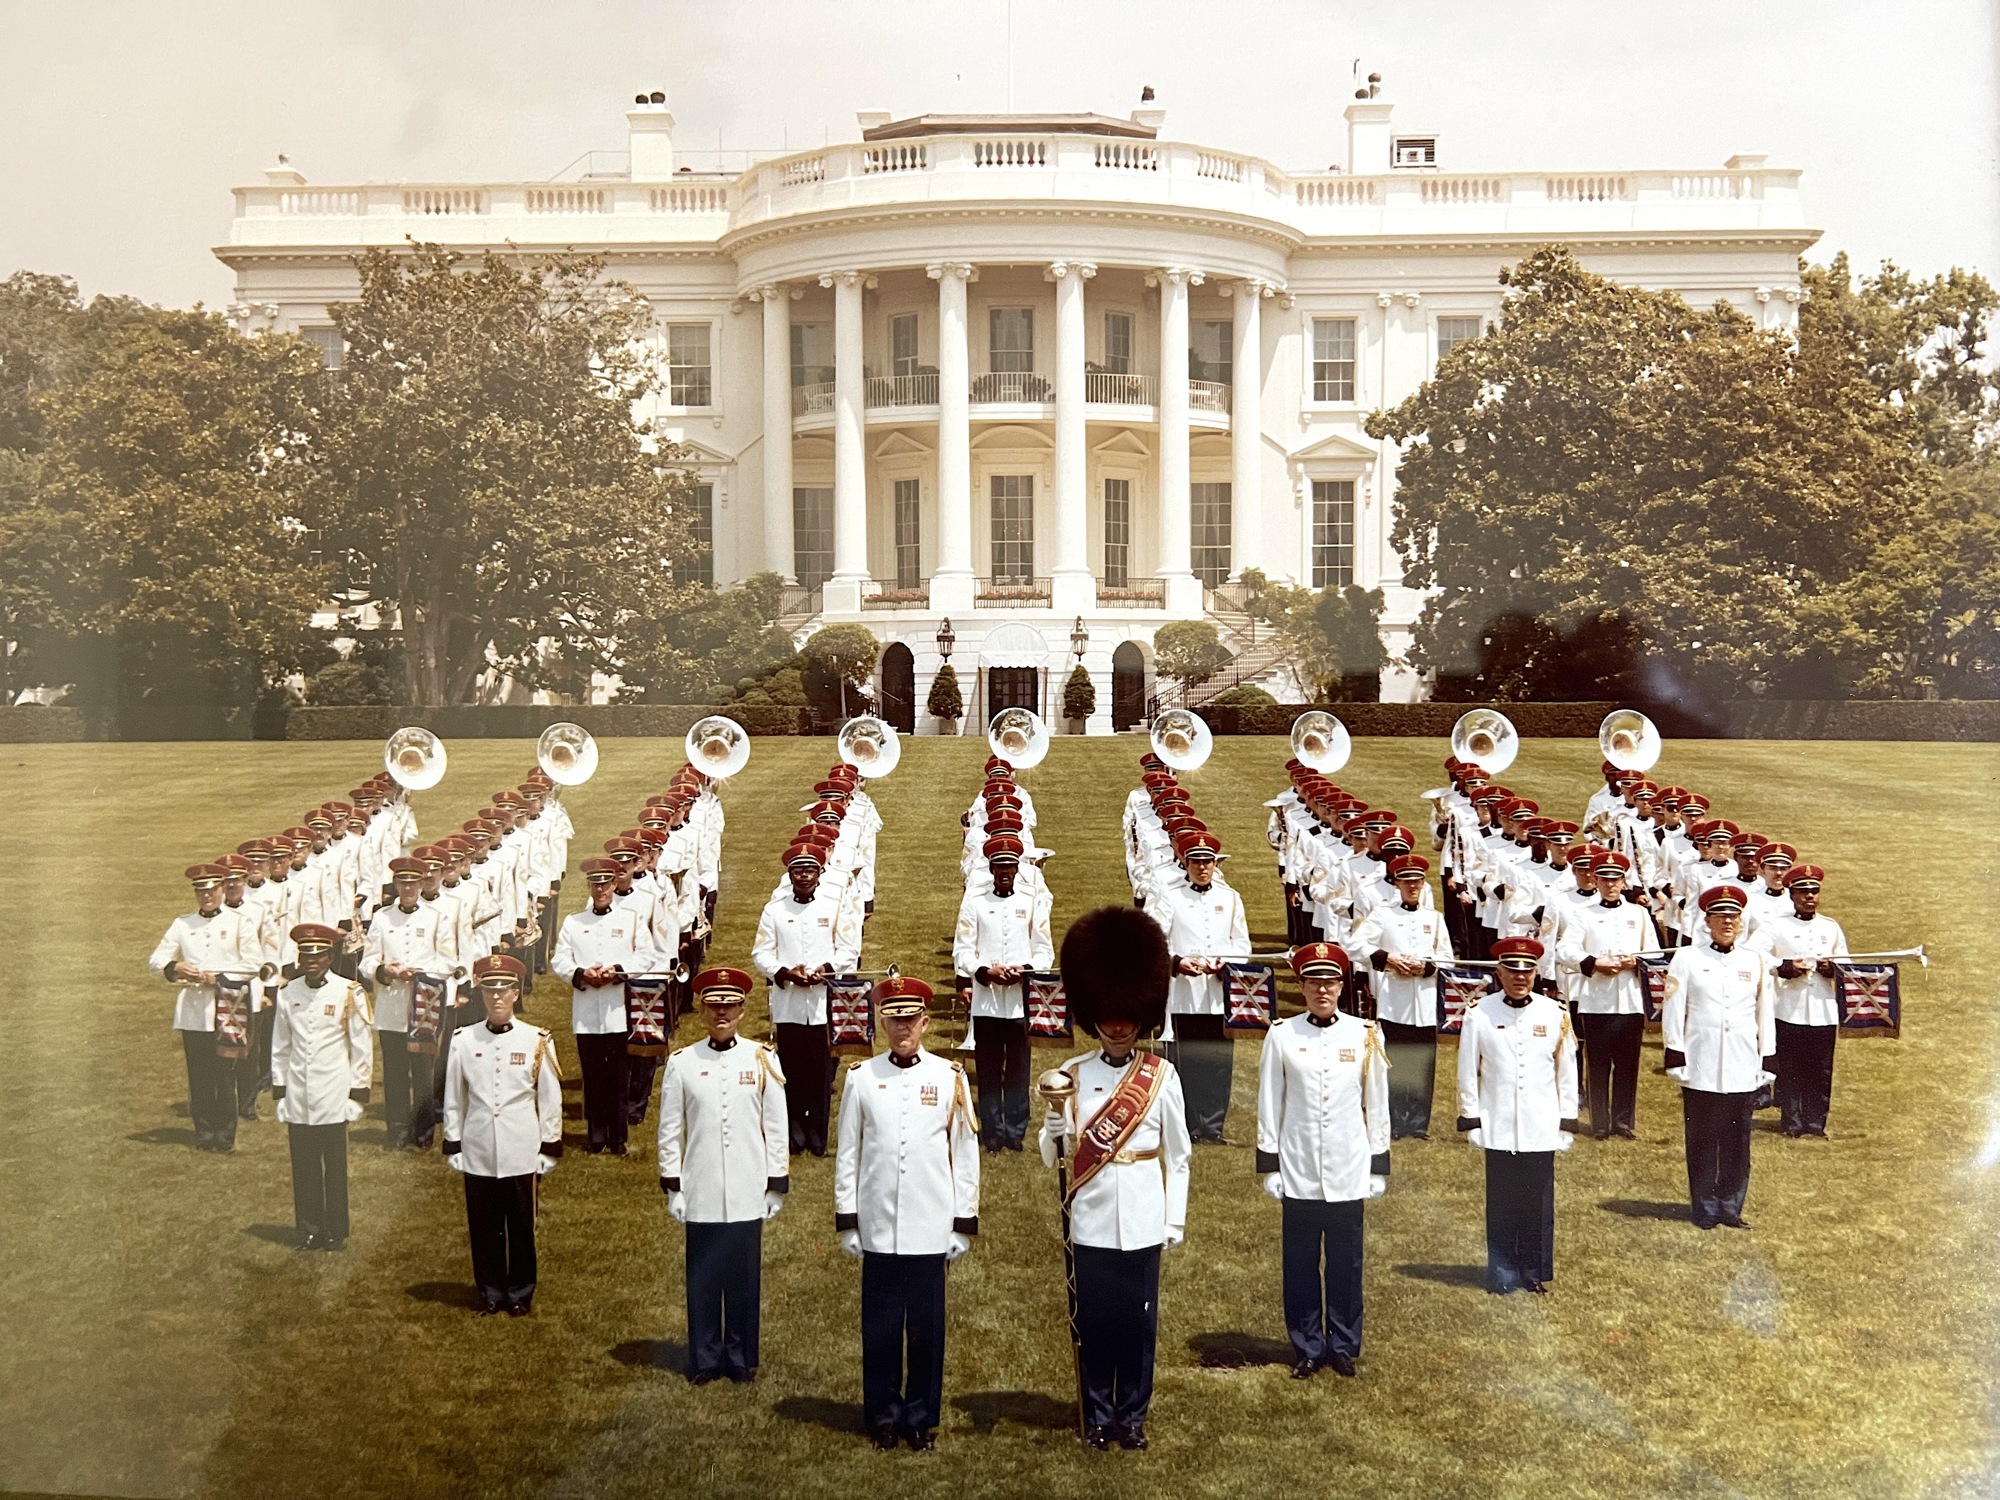 Bob Richards once played with the U.S. Army Band (Pershing's Own) on the South Lawn of the White House. He now plays with the Lakewood Ranch Wind Ensemble. Courtesy photo.